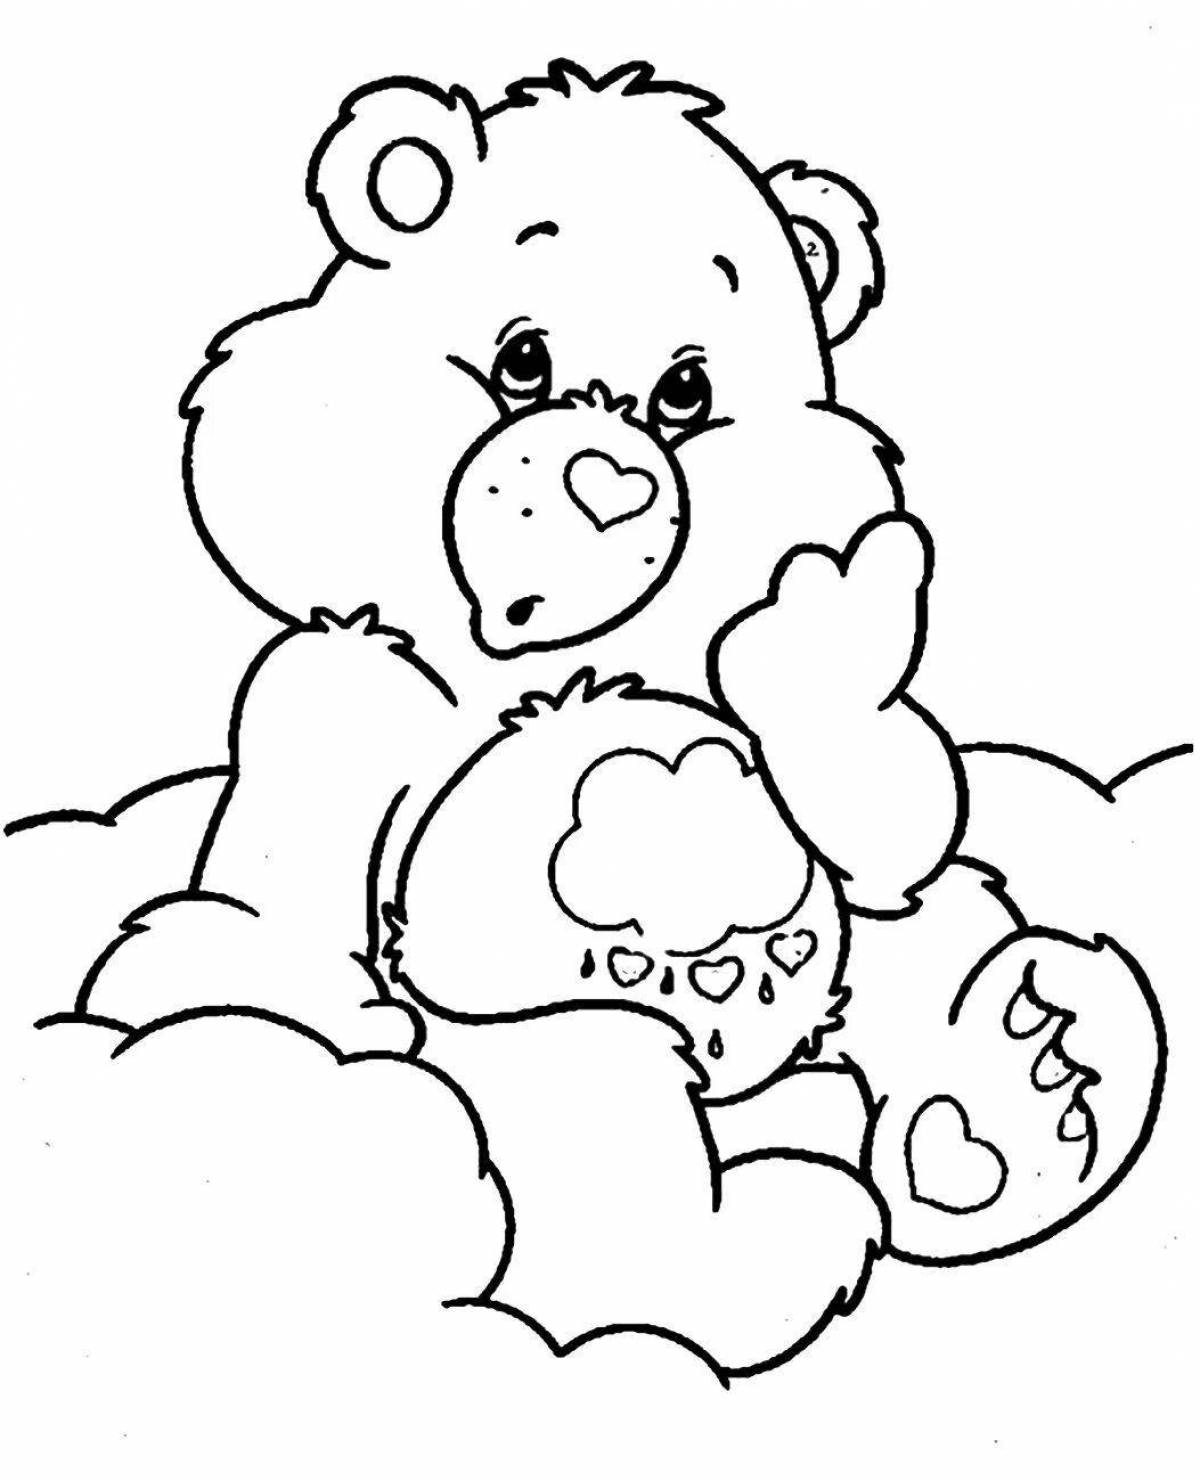 Colorful bear coloring page